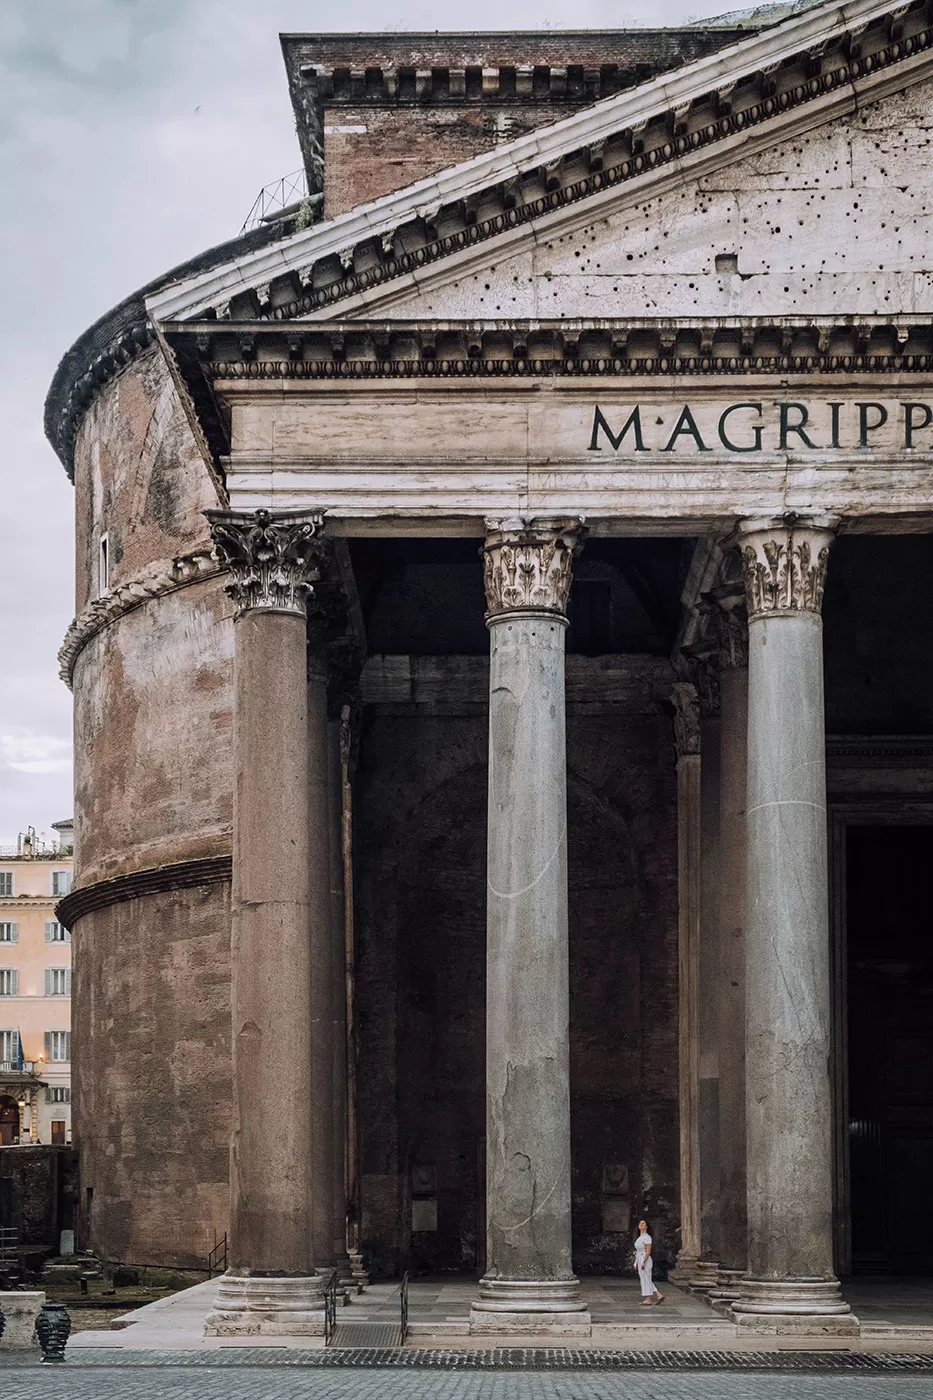 Unique things to do in Rome - Visit inside the Pantheon when it rains